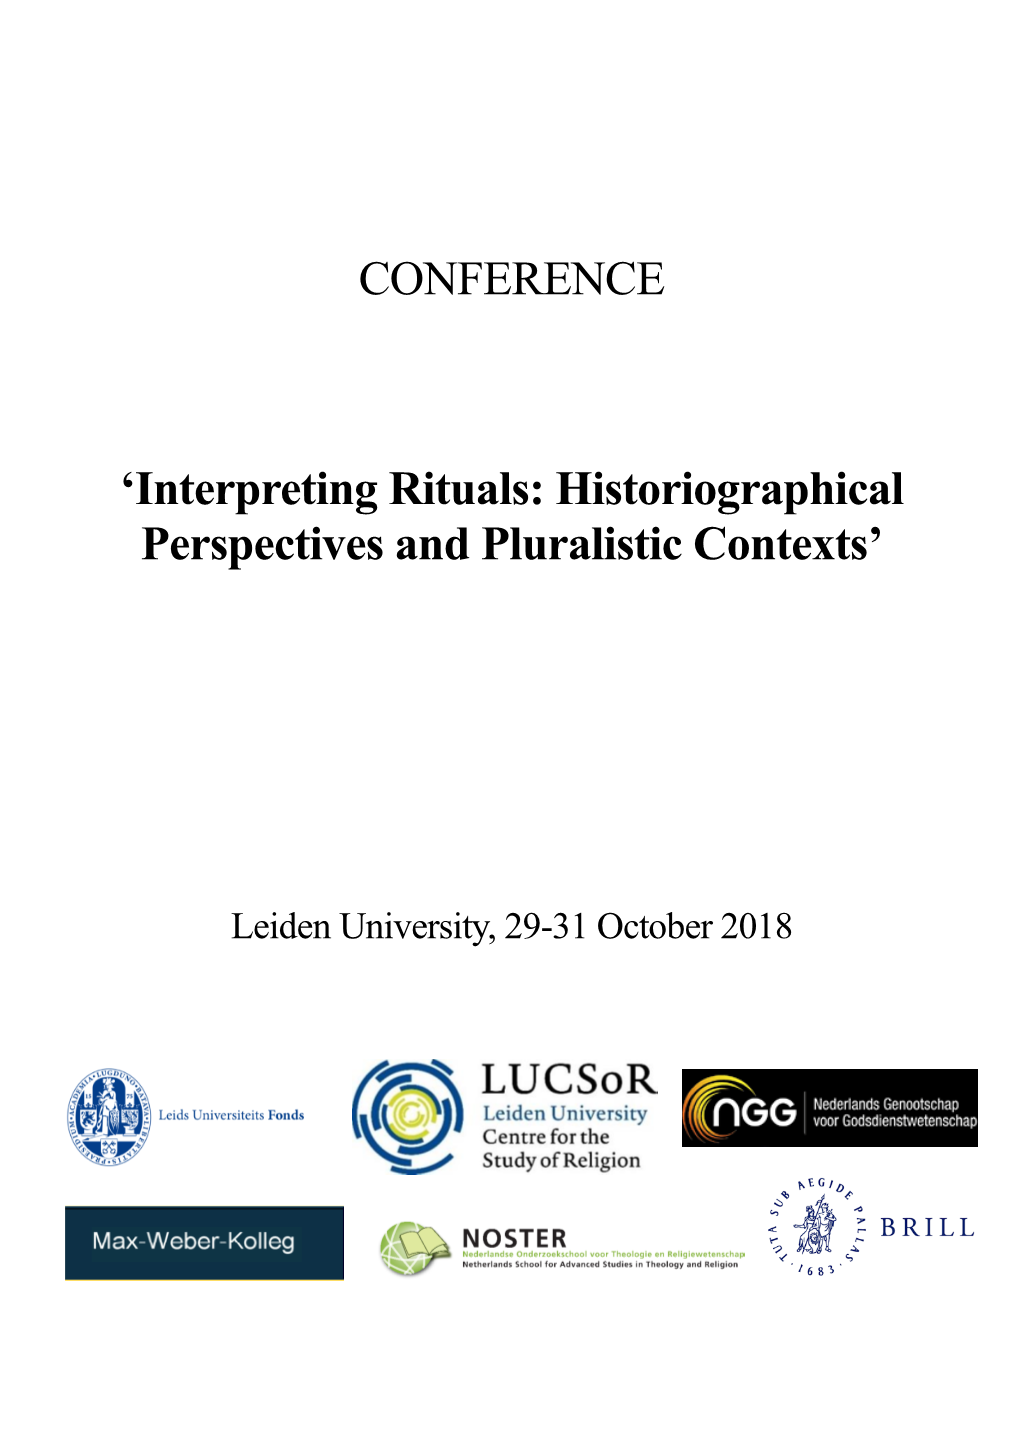 Interpreting Rituals: Historiographical Perspectives and Pluralistic Contexts